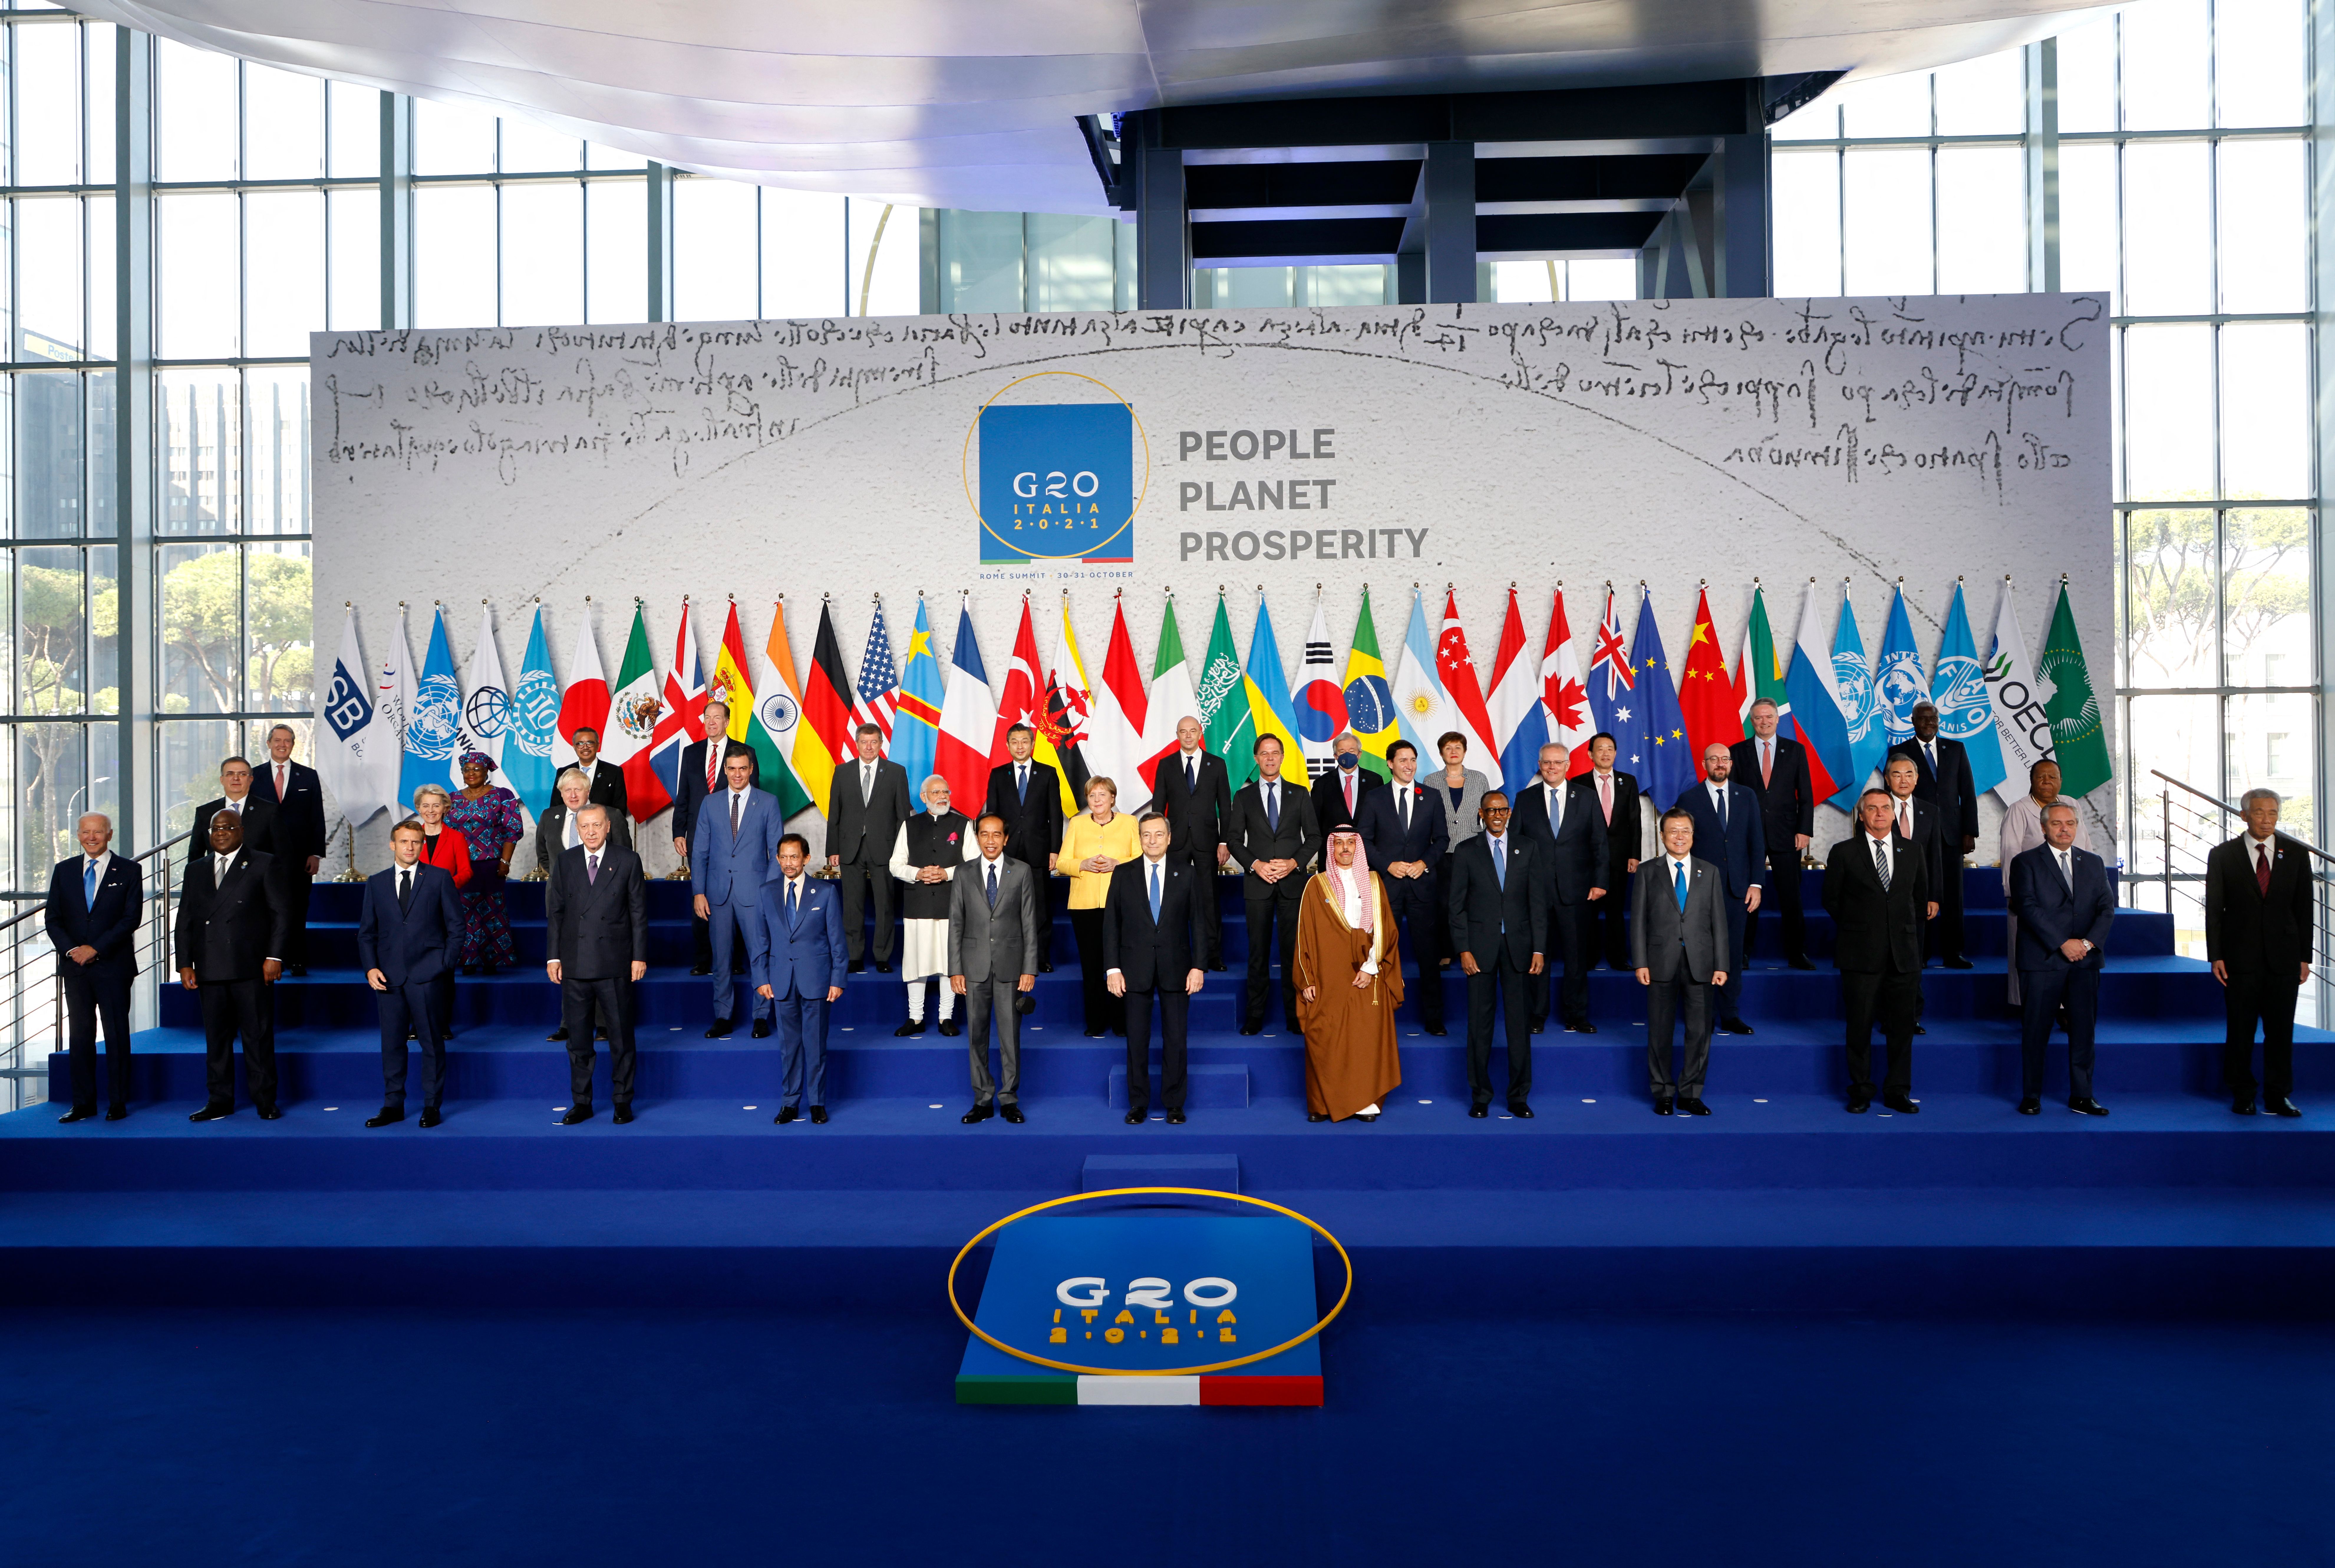 Group photo showing the G20 leaders in attendance.